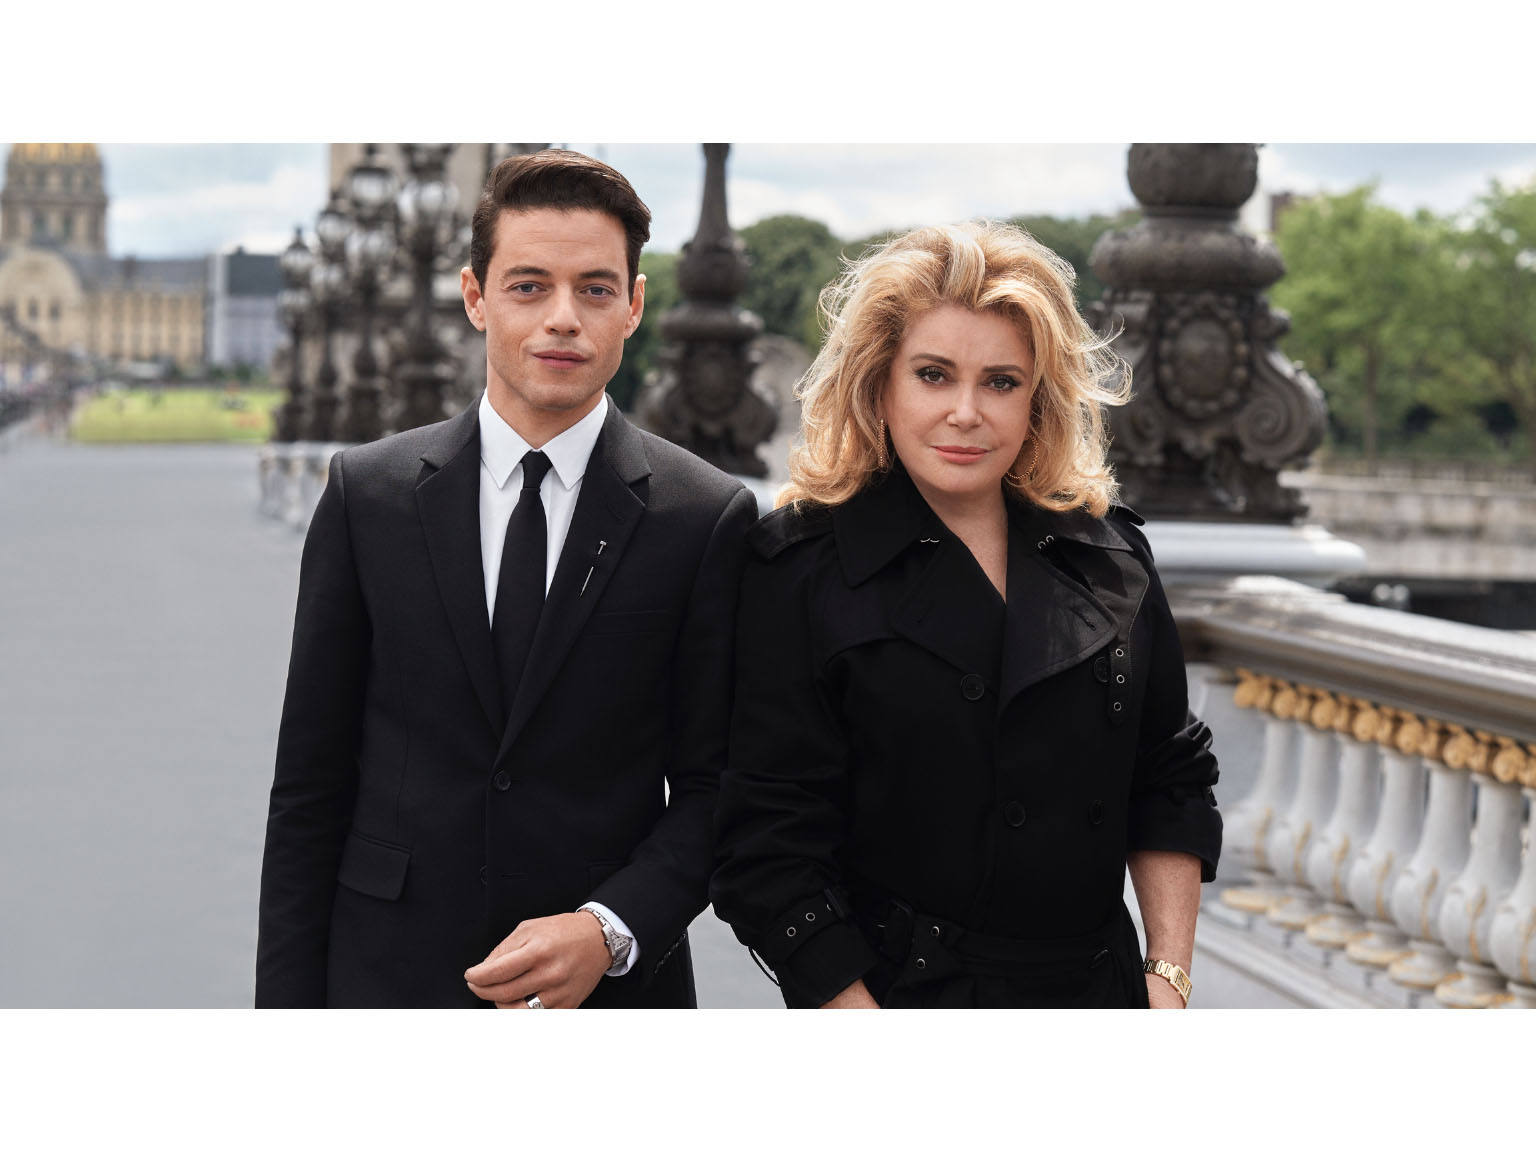 An exquisite new campaign from Publicis Luxe for Cartier with Rami Malek, Catherine Deneuve and Guy Ritchie